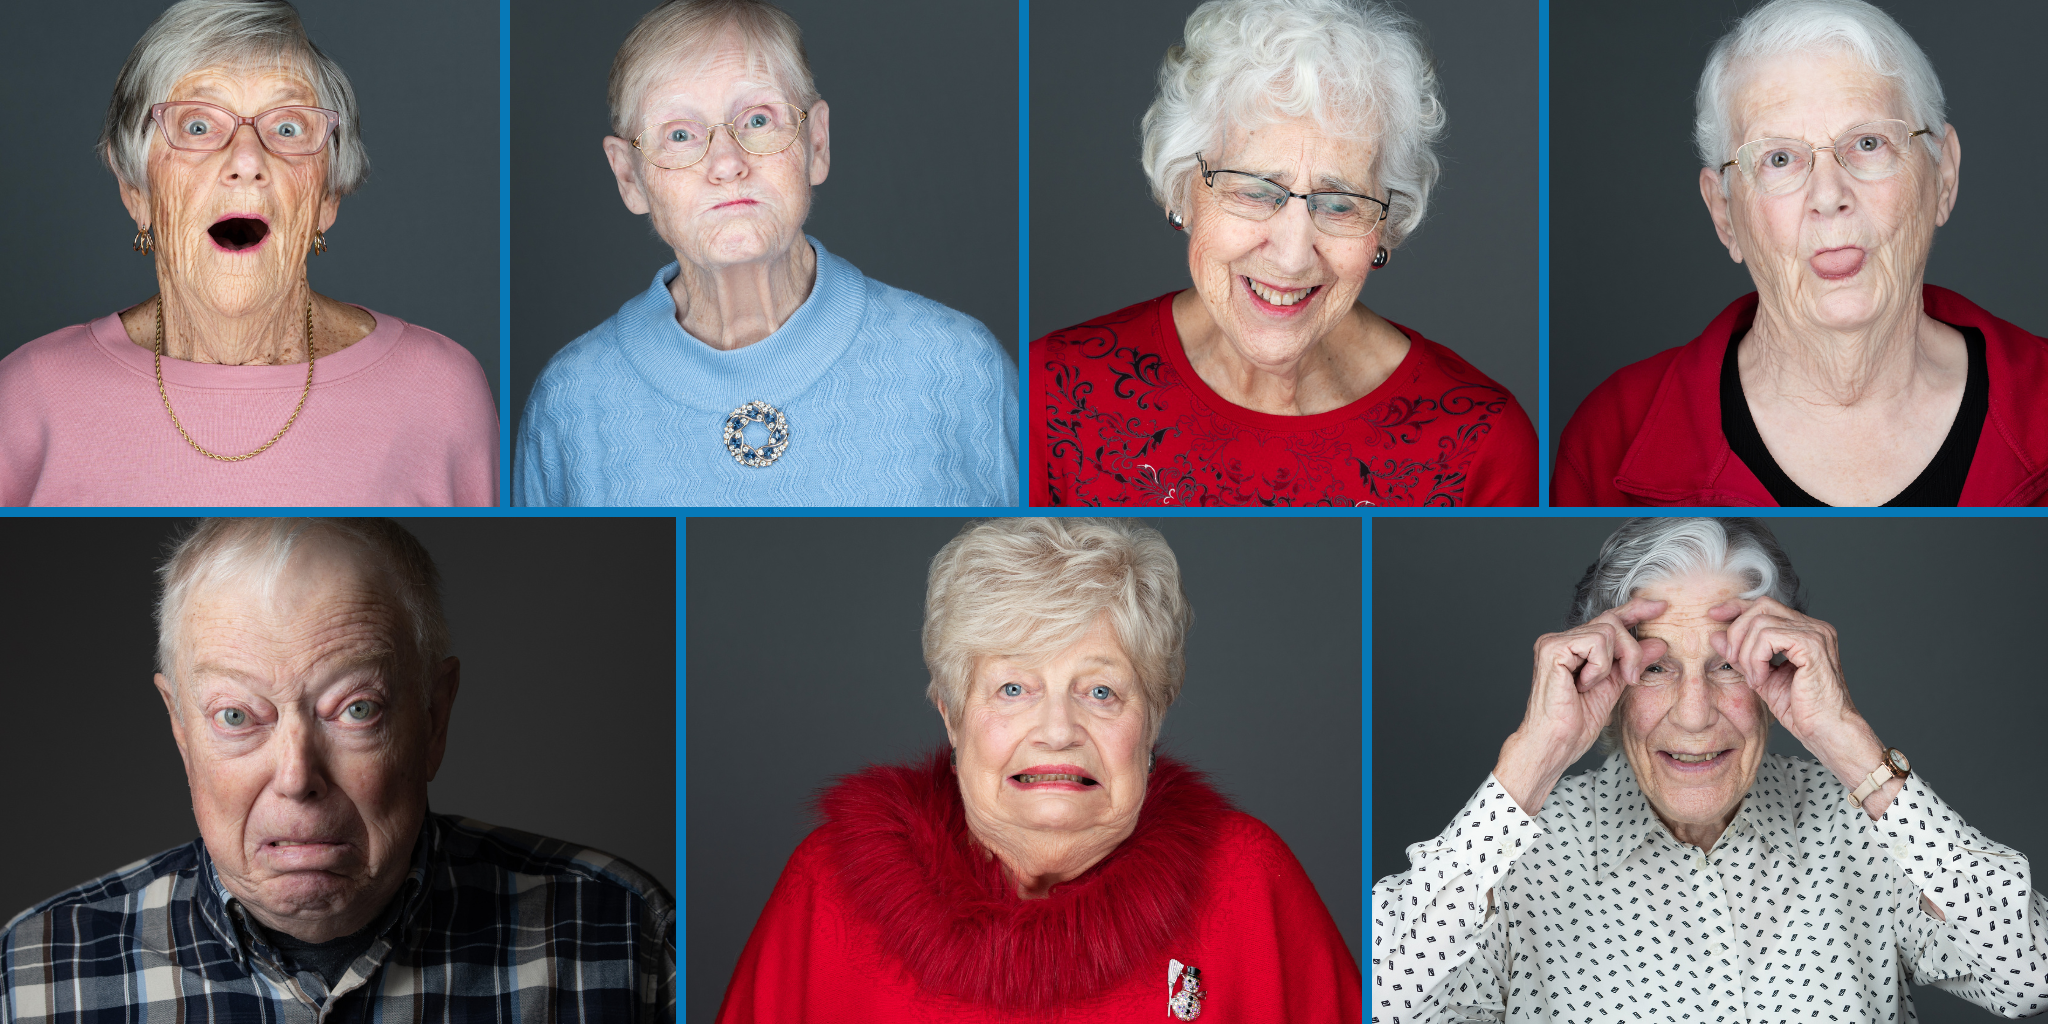 photos of seniors will silly faces